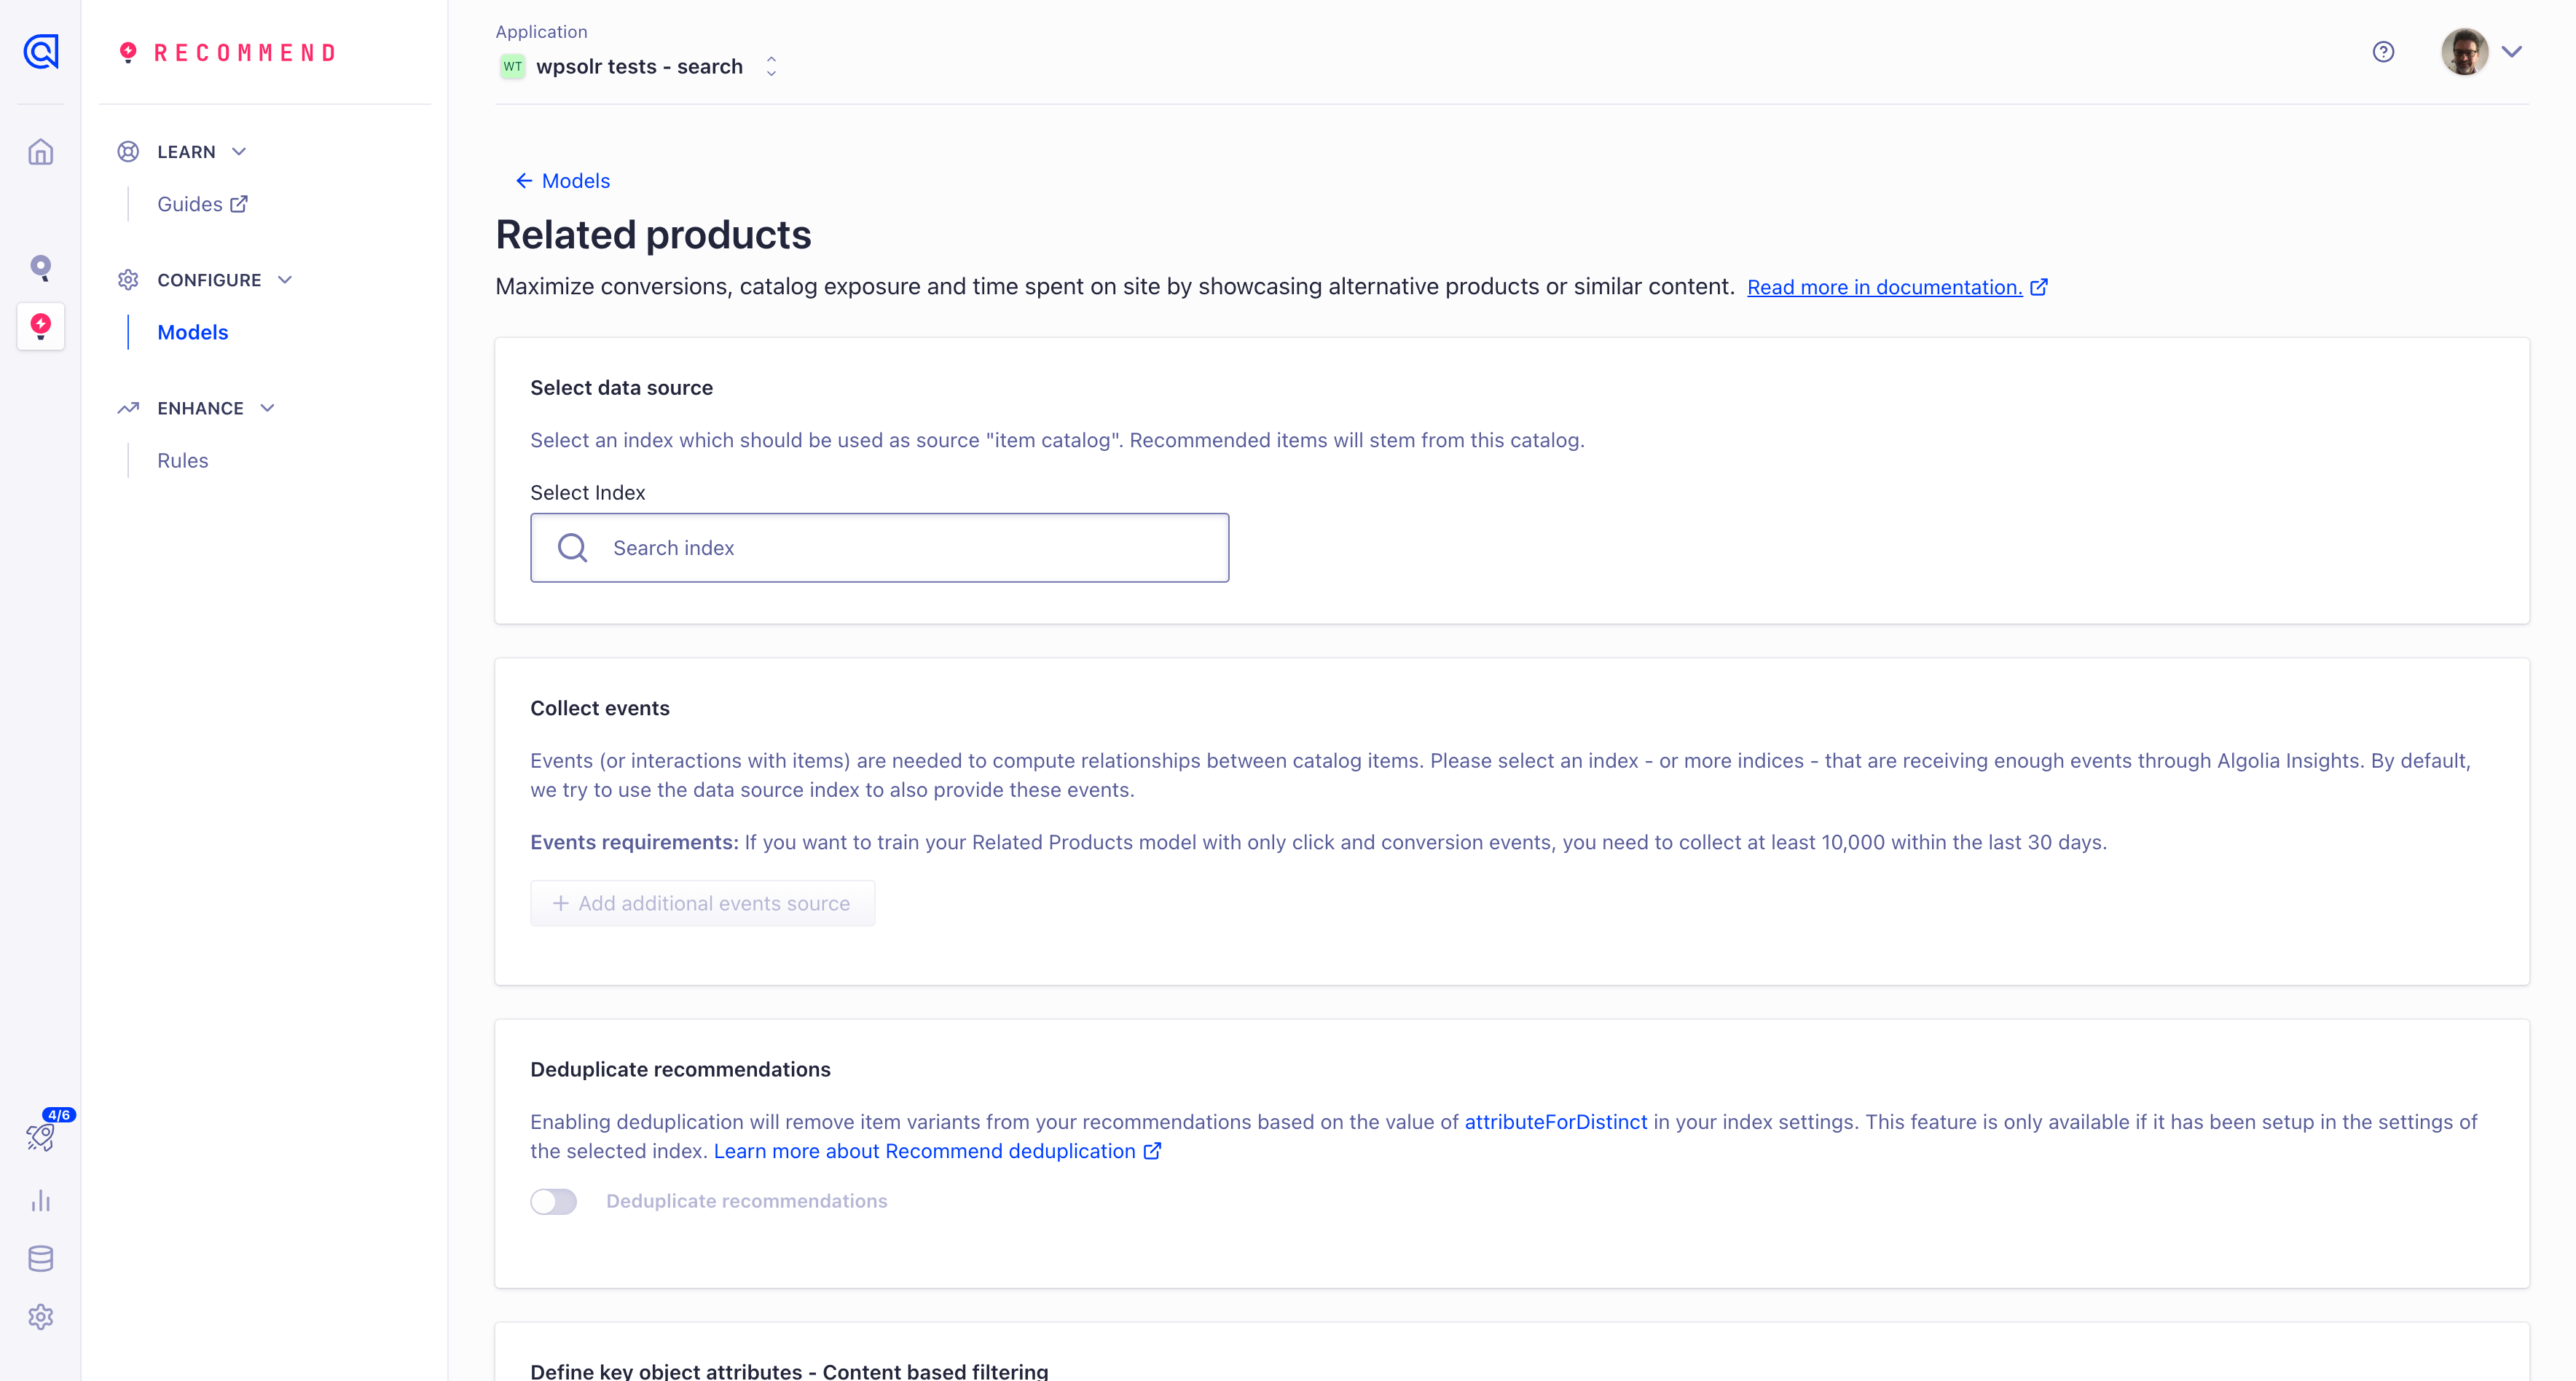 Image algolia-model-related-products.png of Algolia recommendations guide